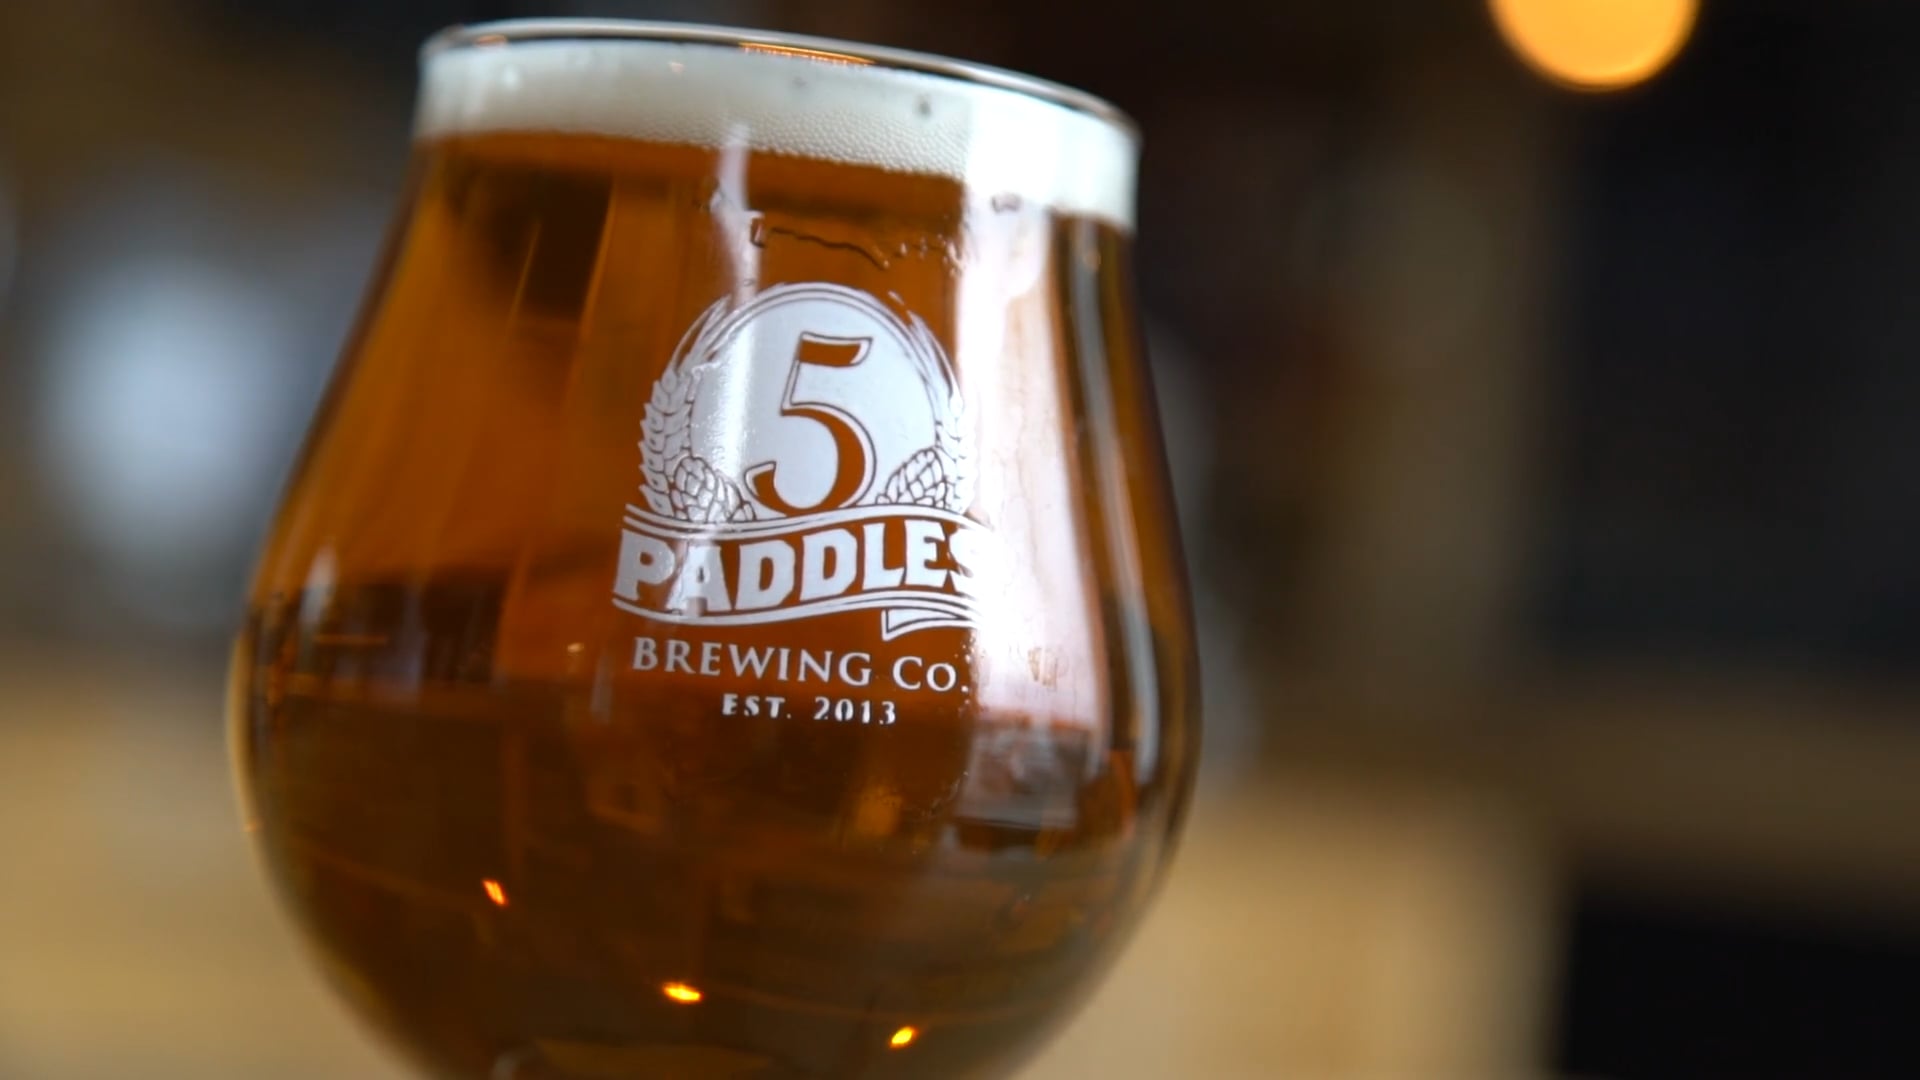 5 Paddles Brewing - Jack Astor's Whitby